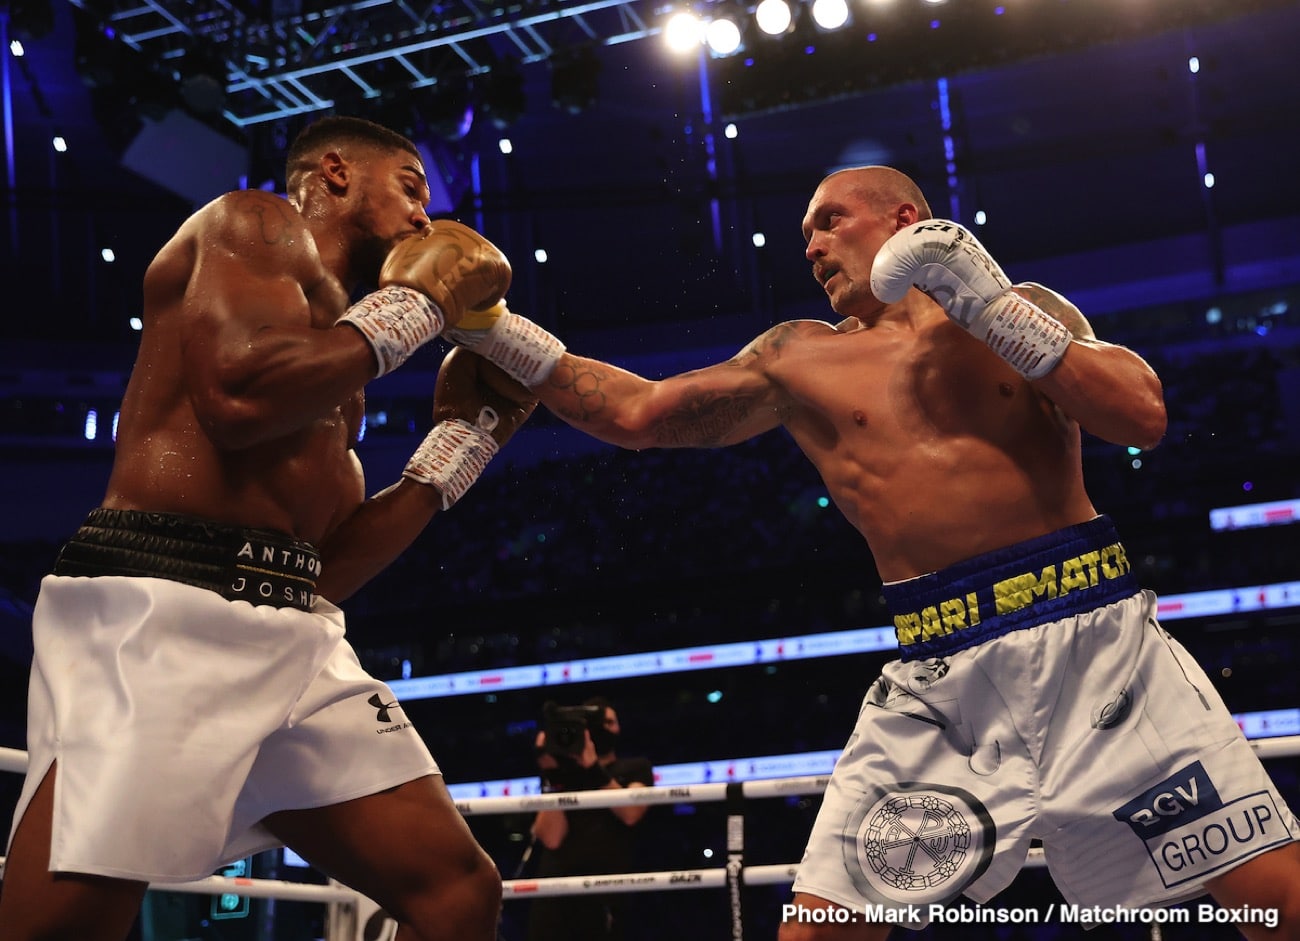 Image: Anthony Joshua vs. Oleksandr Usyk rematch in March or April 2022, possibly London says Eddie Hearn